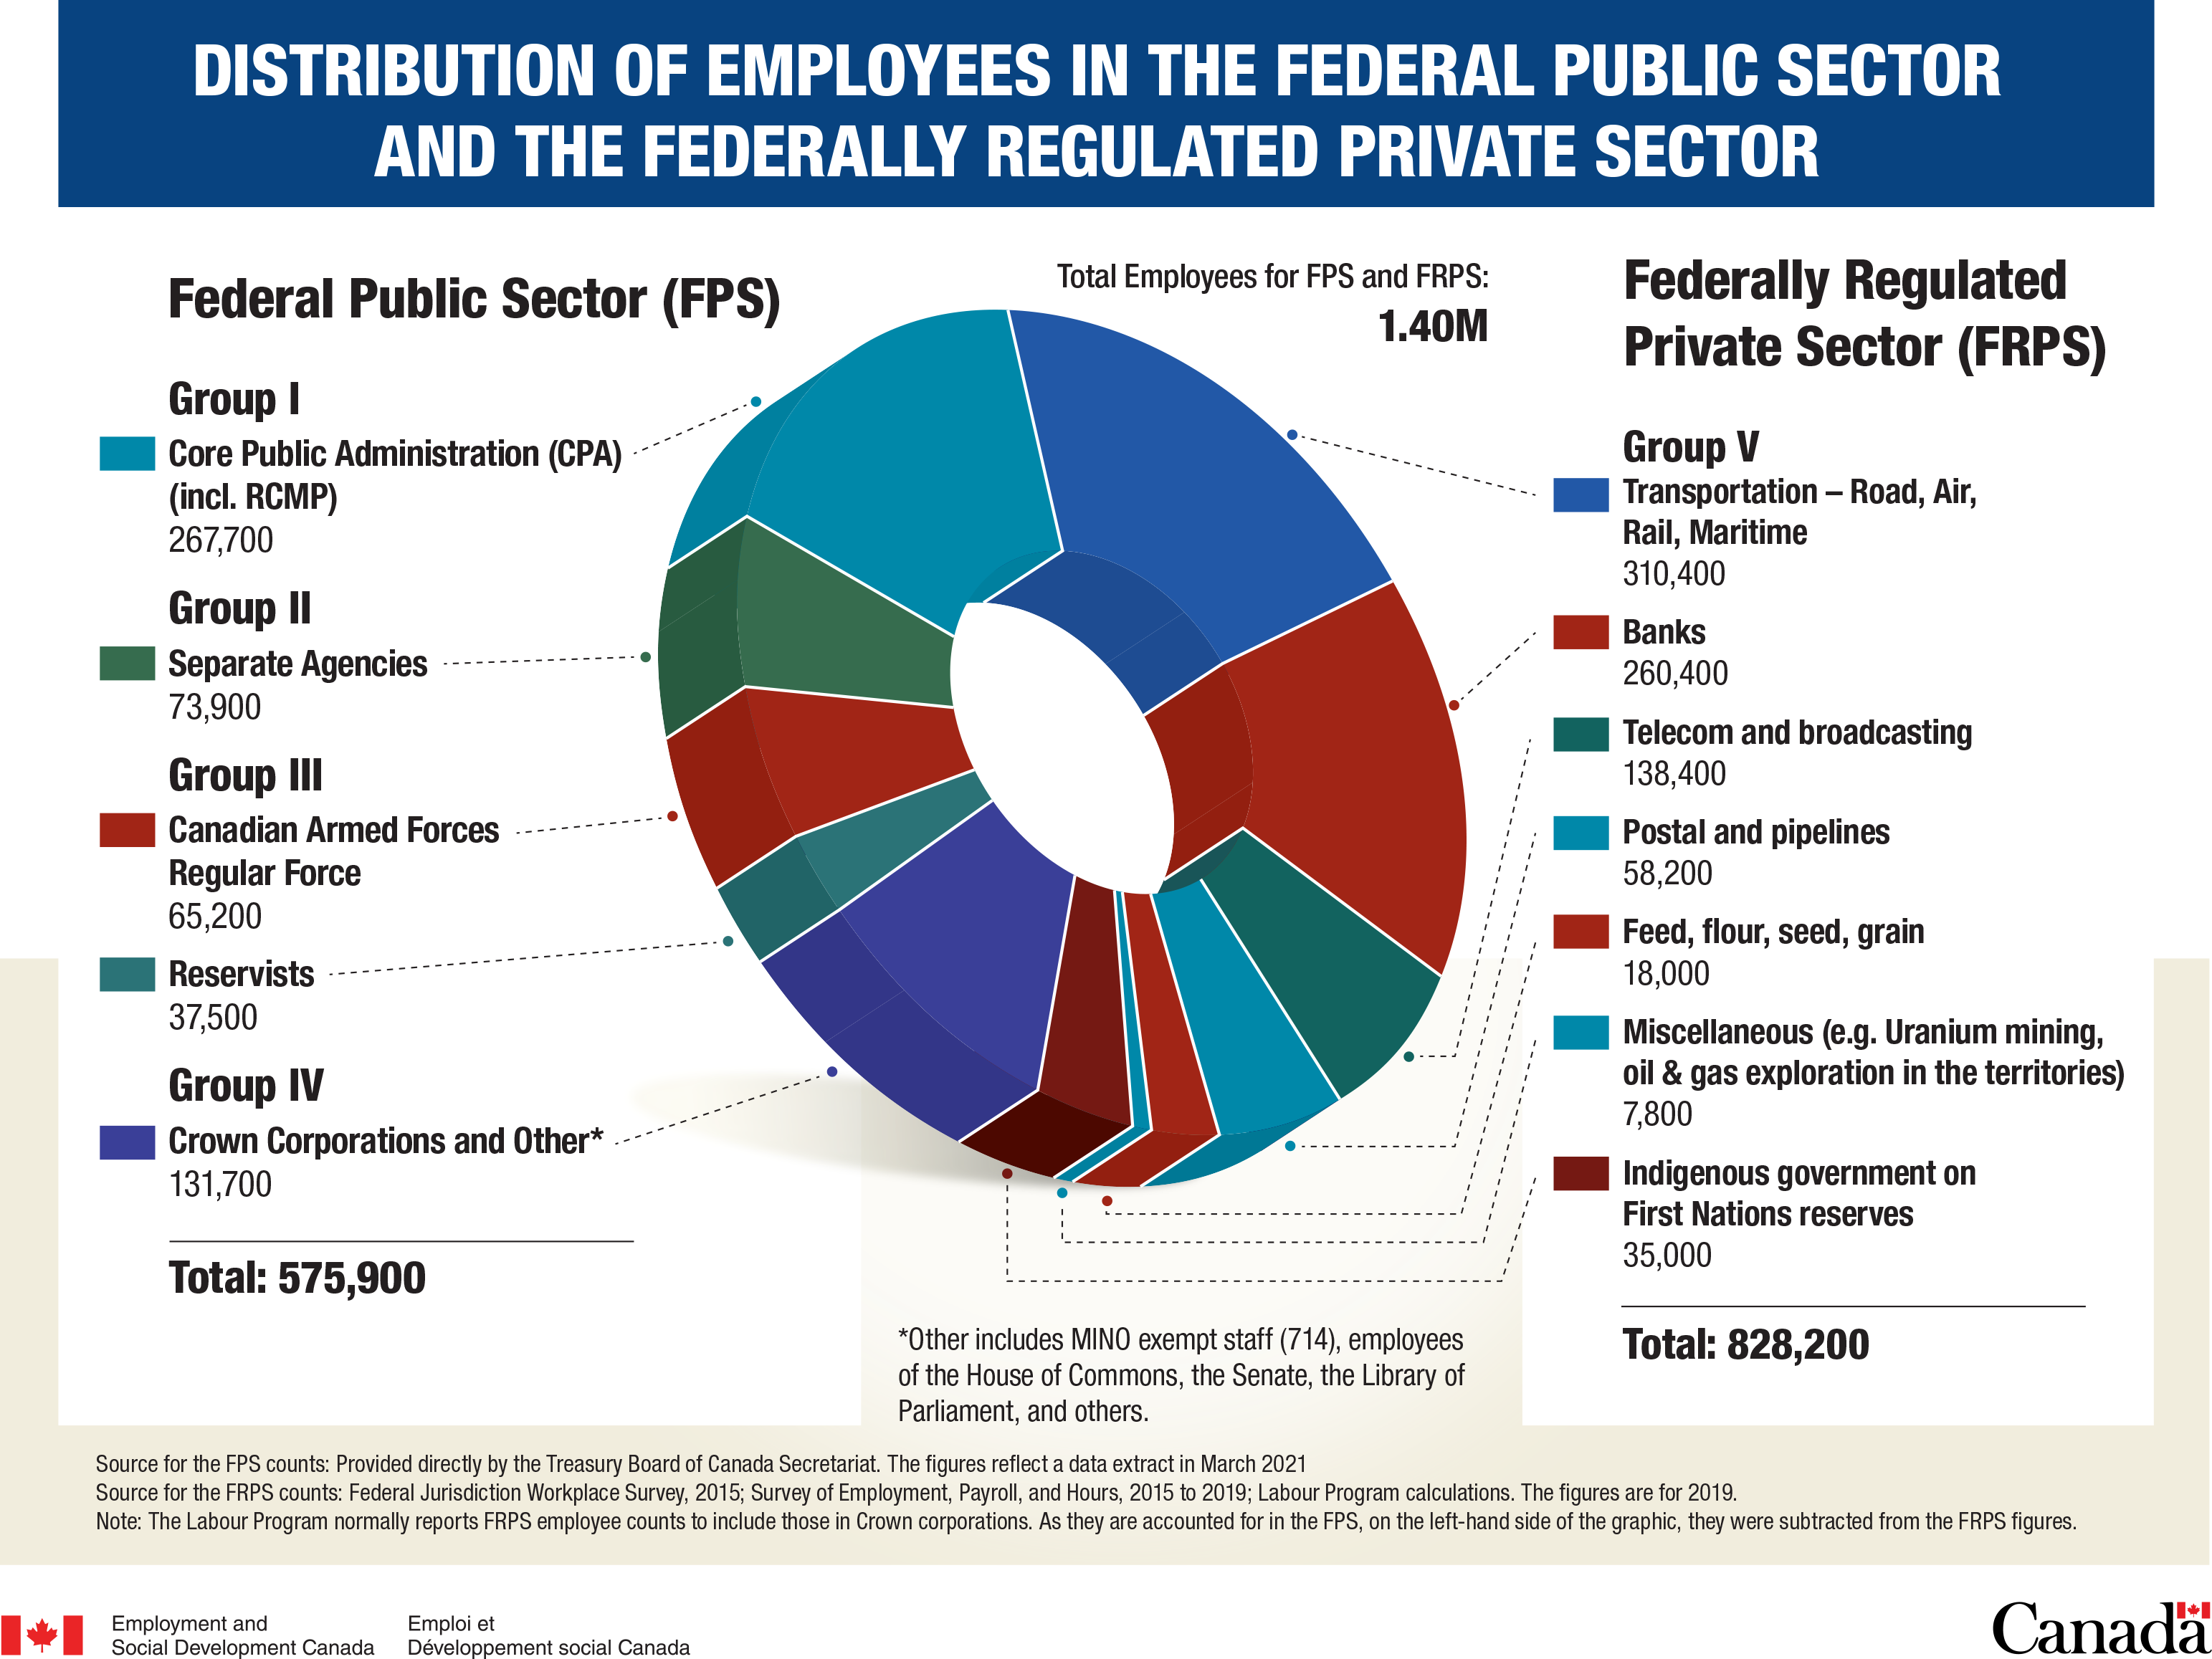 Distribution of Employees in the Federal Public Sector and the Federally Regulated Private Sector